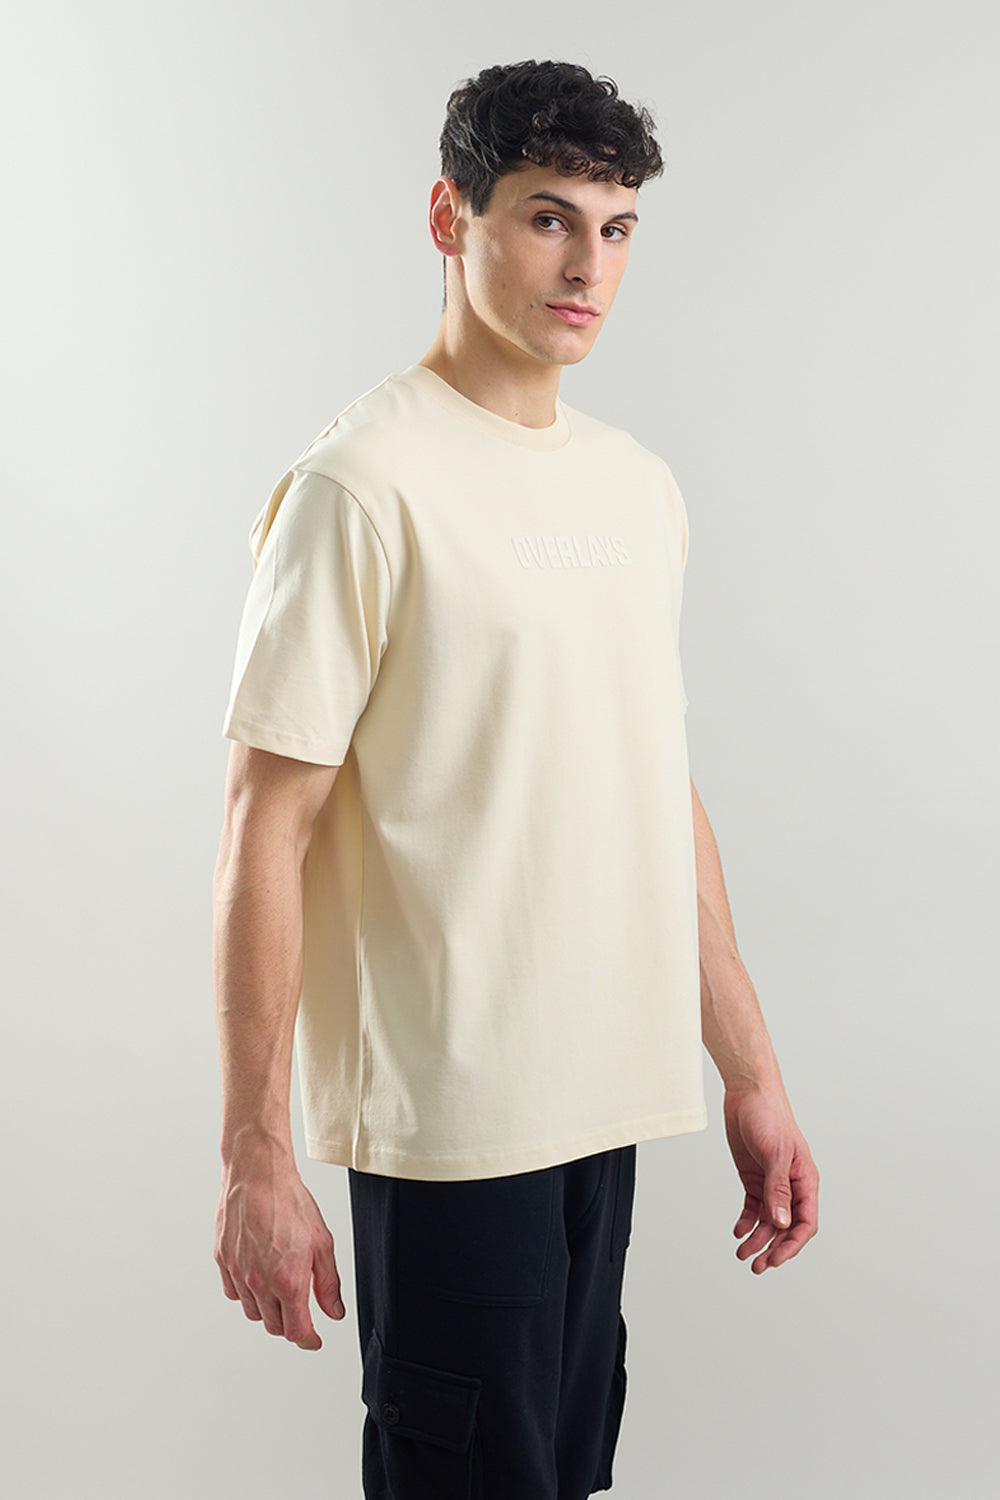 The Amber Bloom Relaxed Fit T-shirt - Ultra Soft